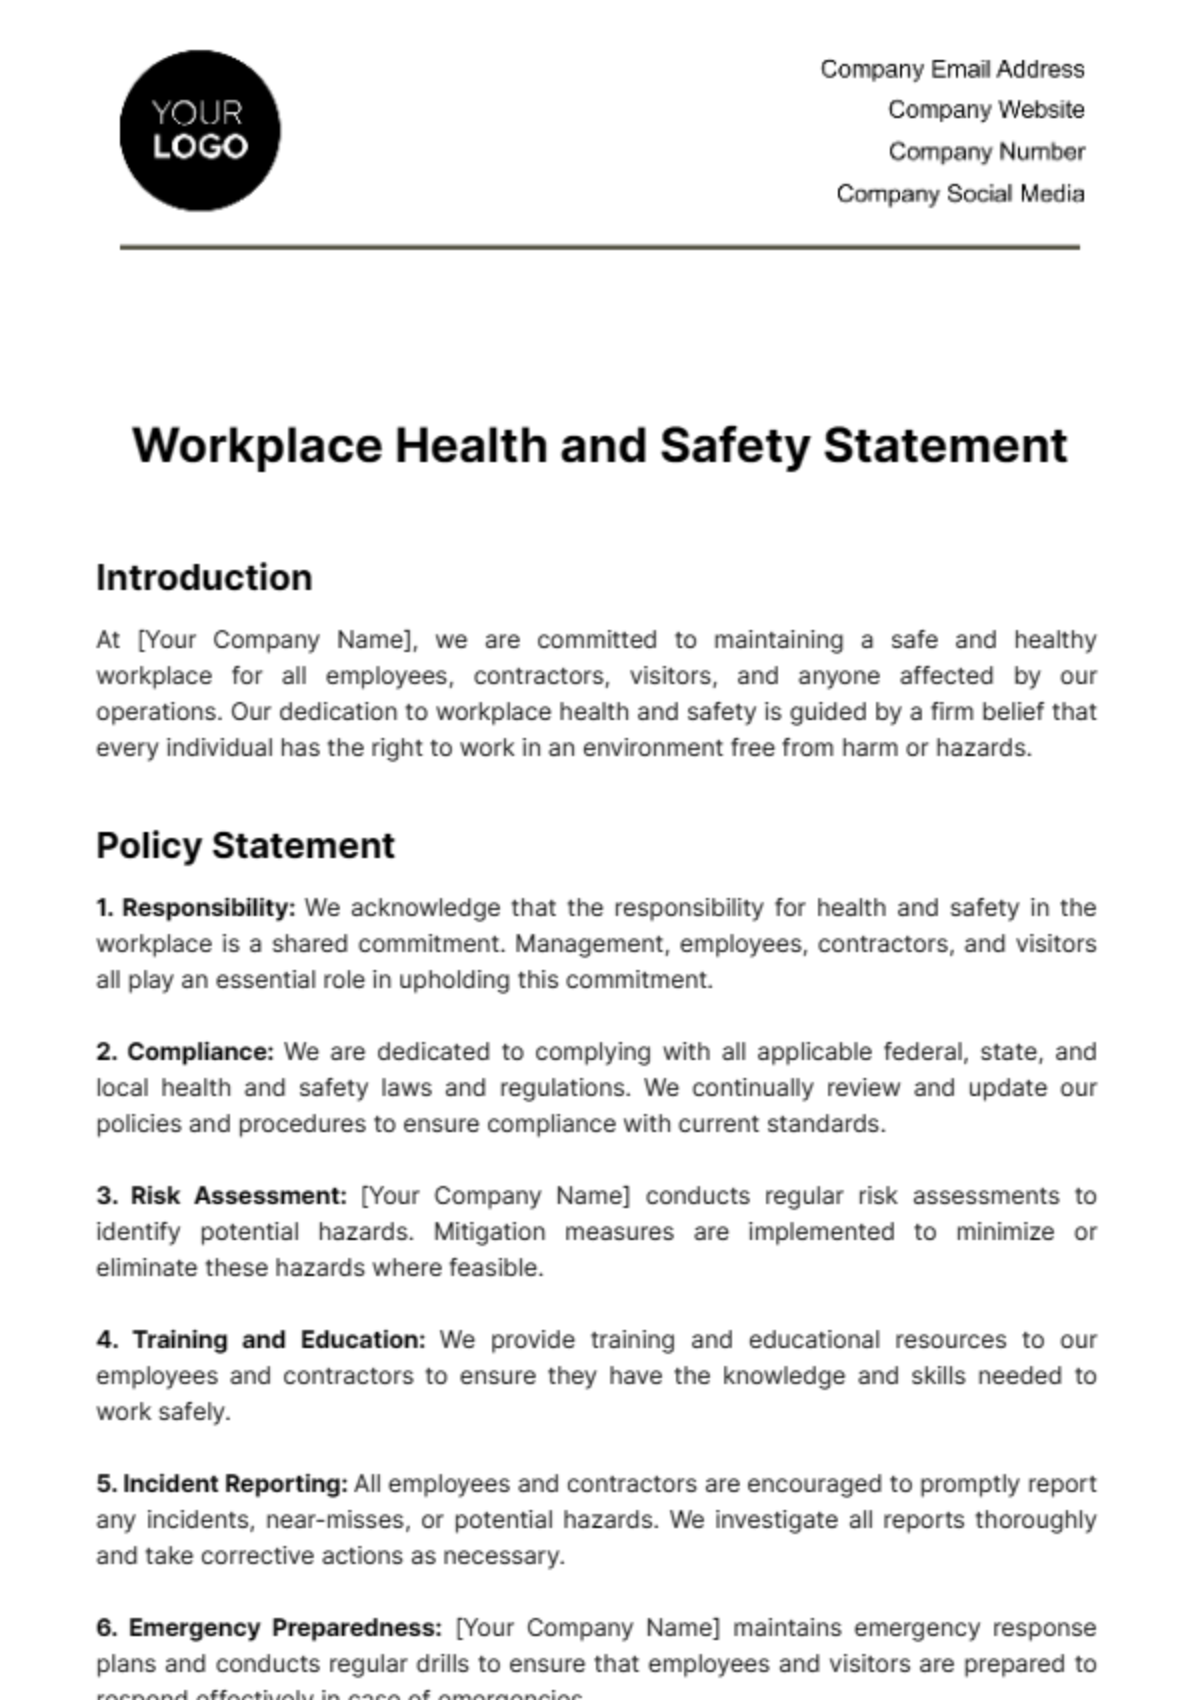 Free Workplace Health and Safety Statement Template